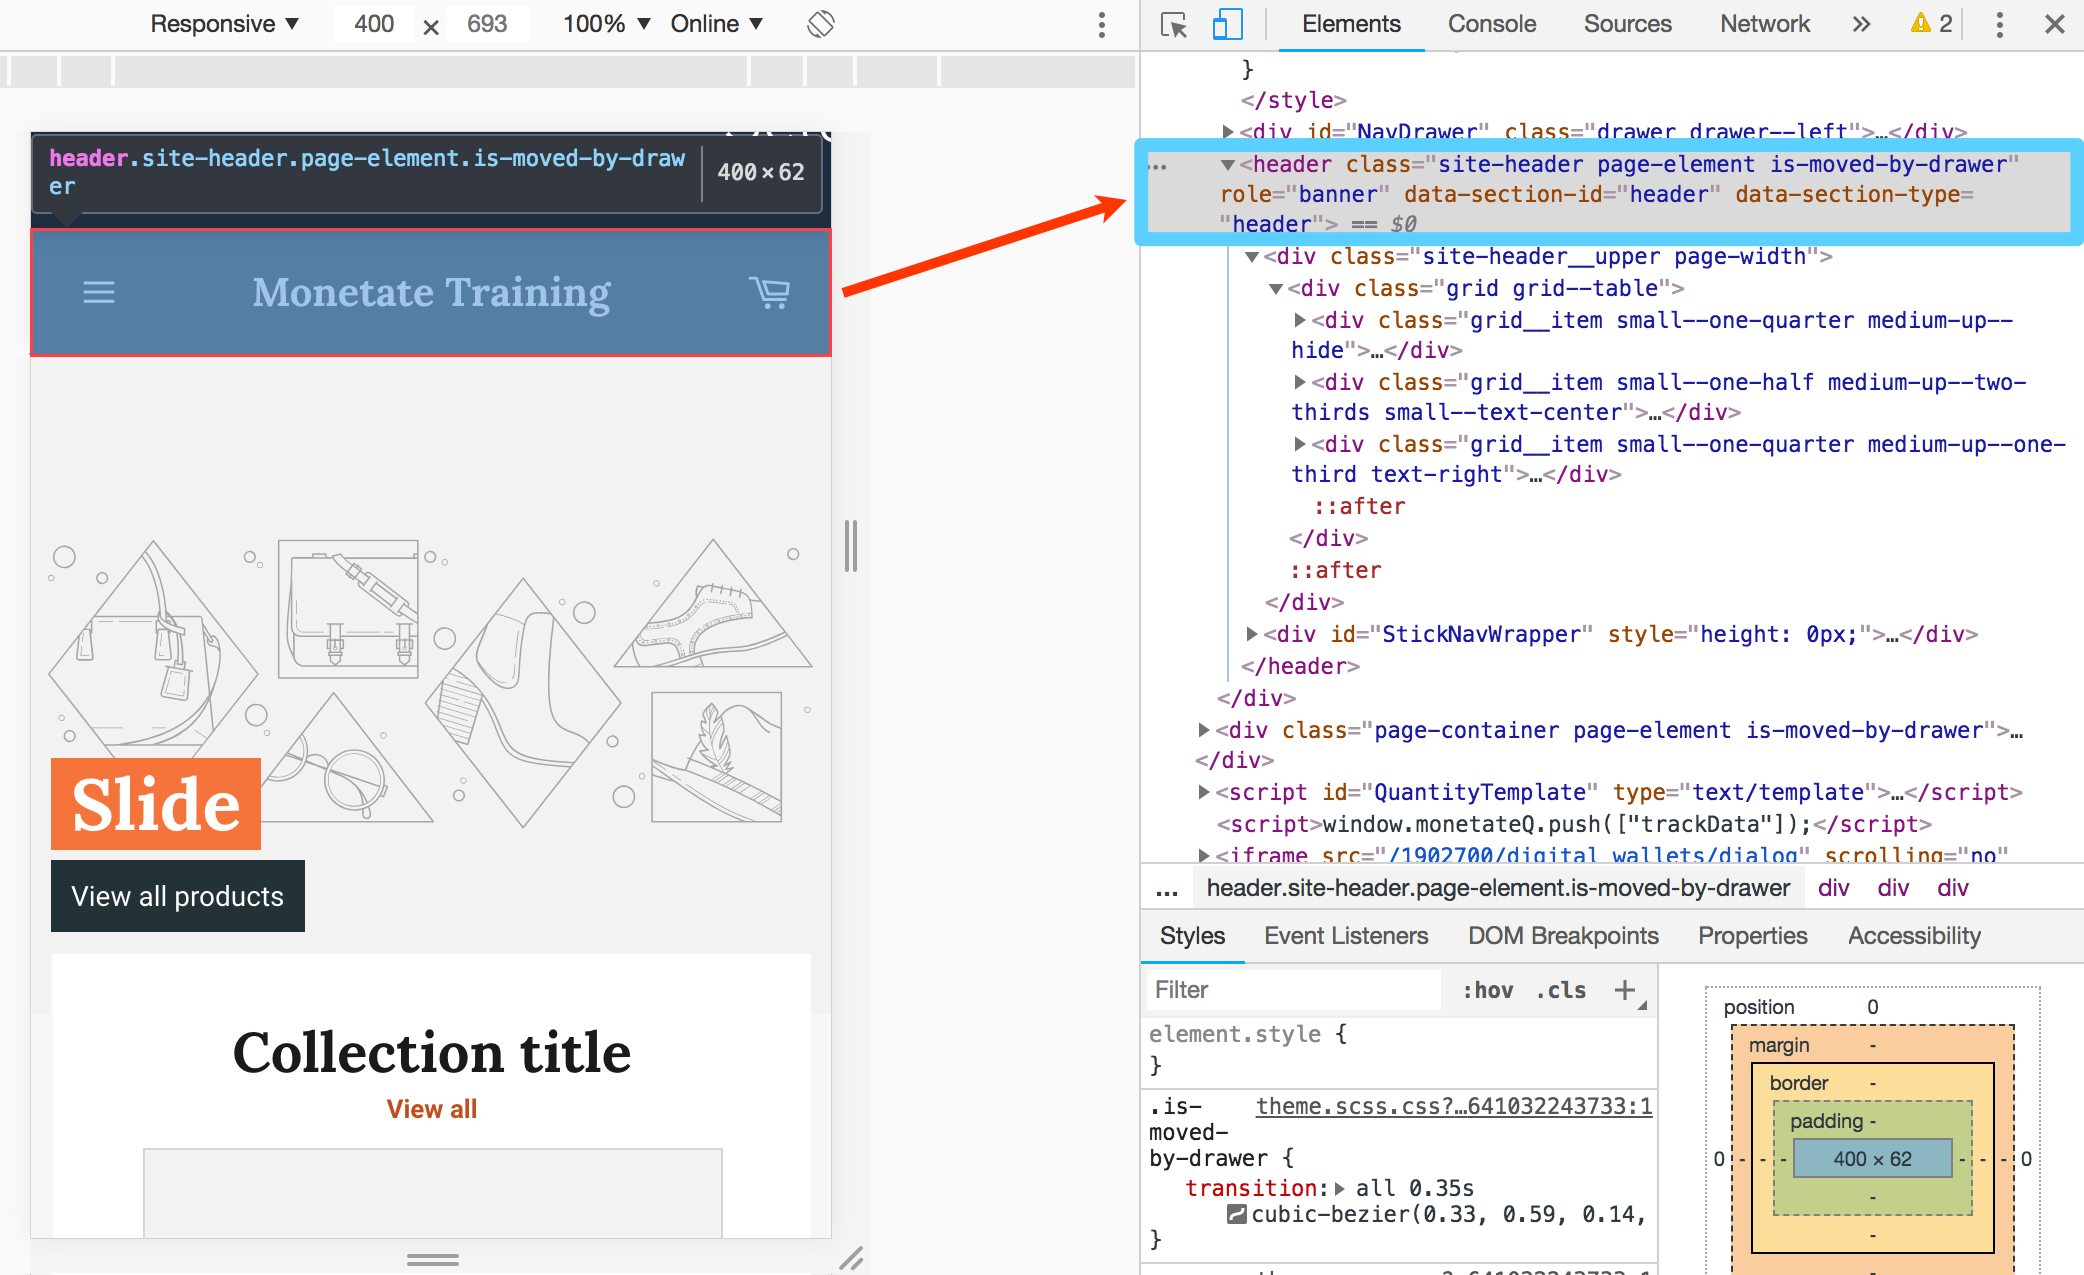 Callout of the header selector in the HTML code for an online retail site's mobile version